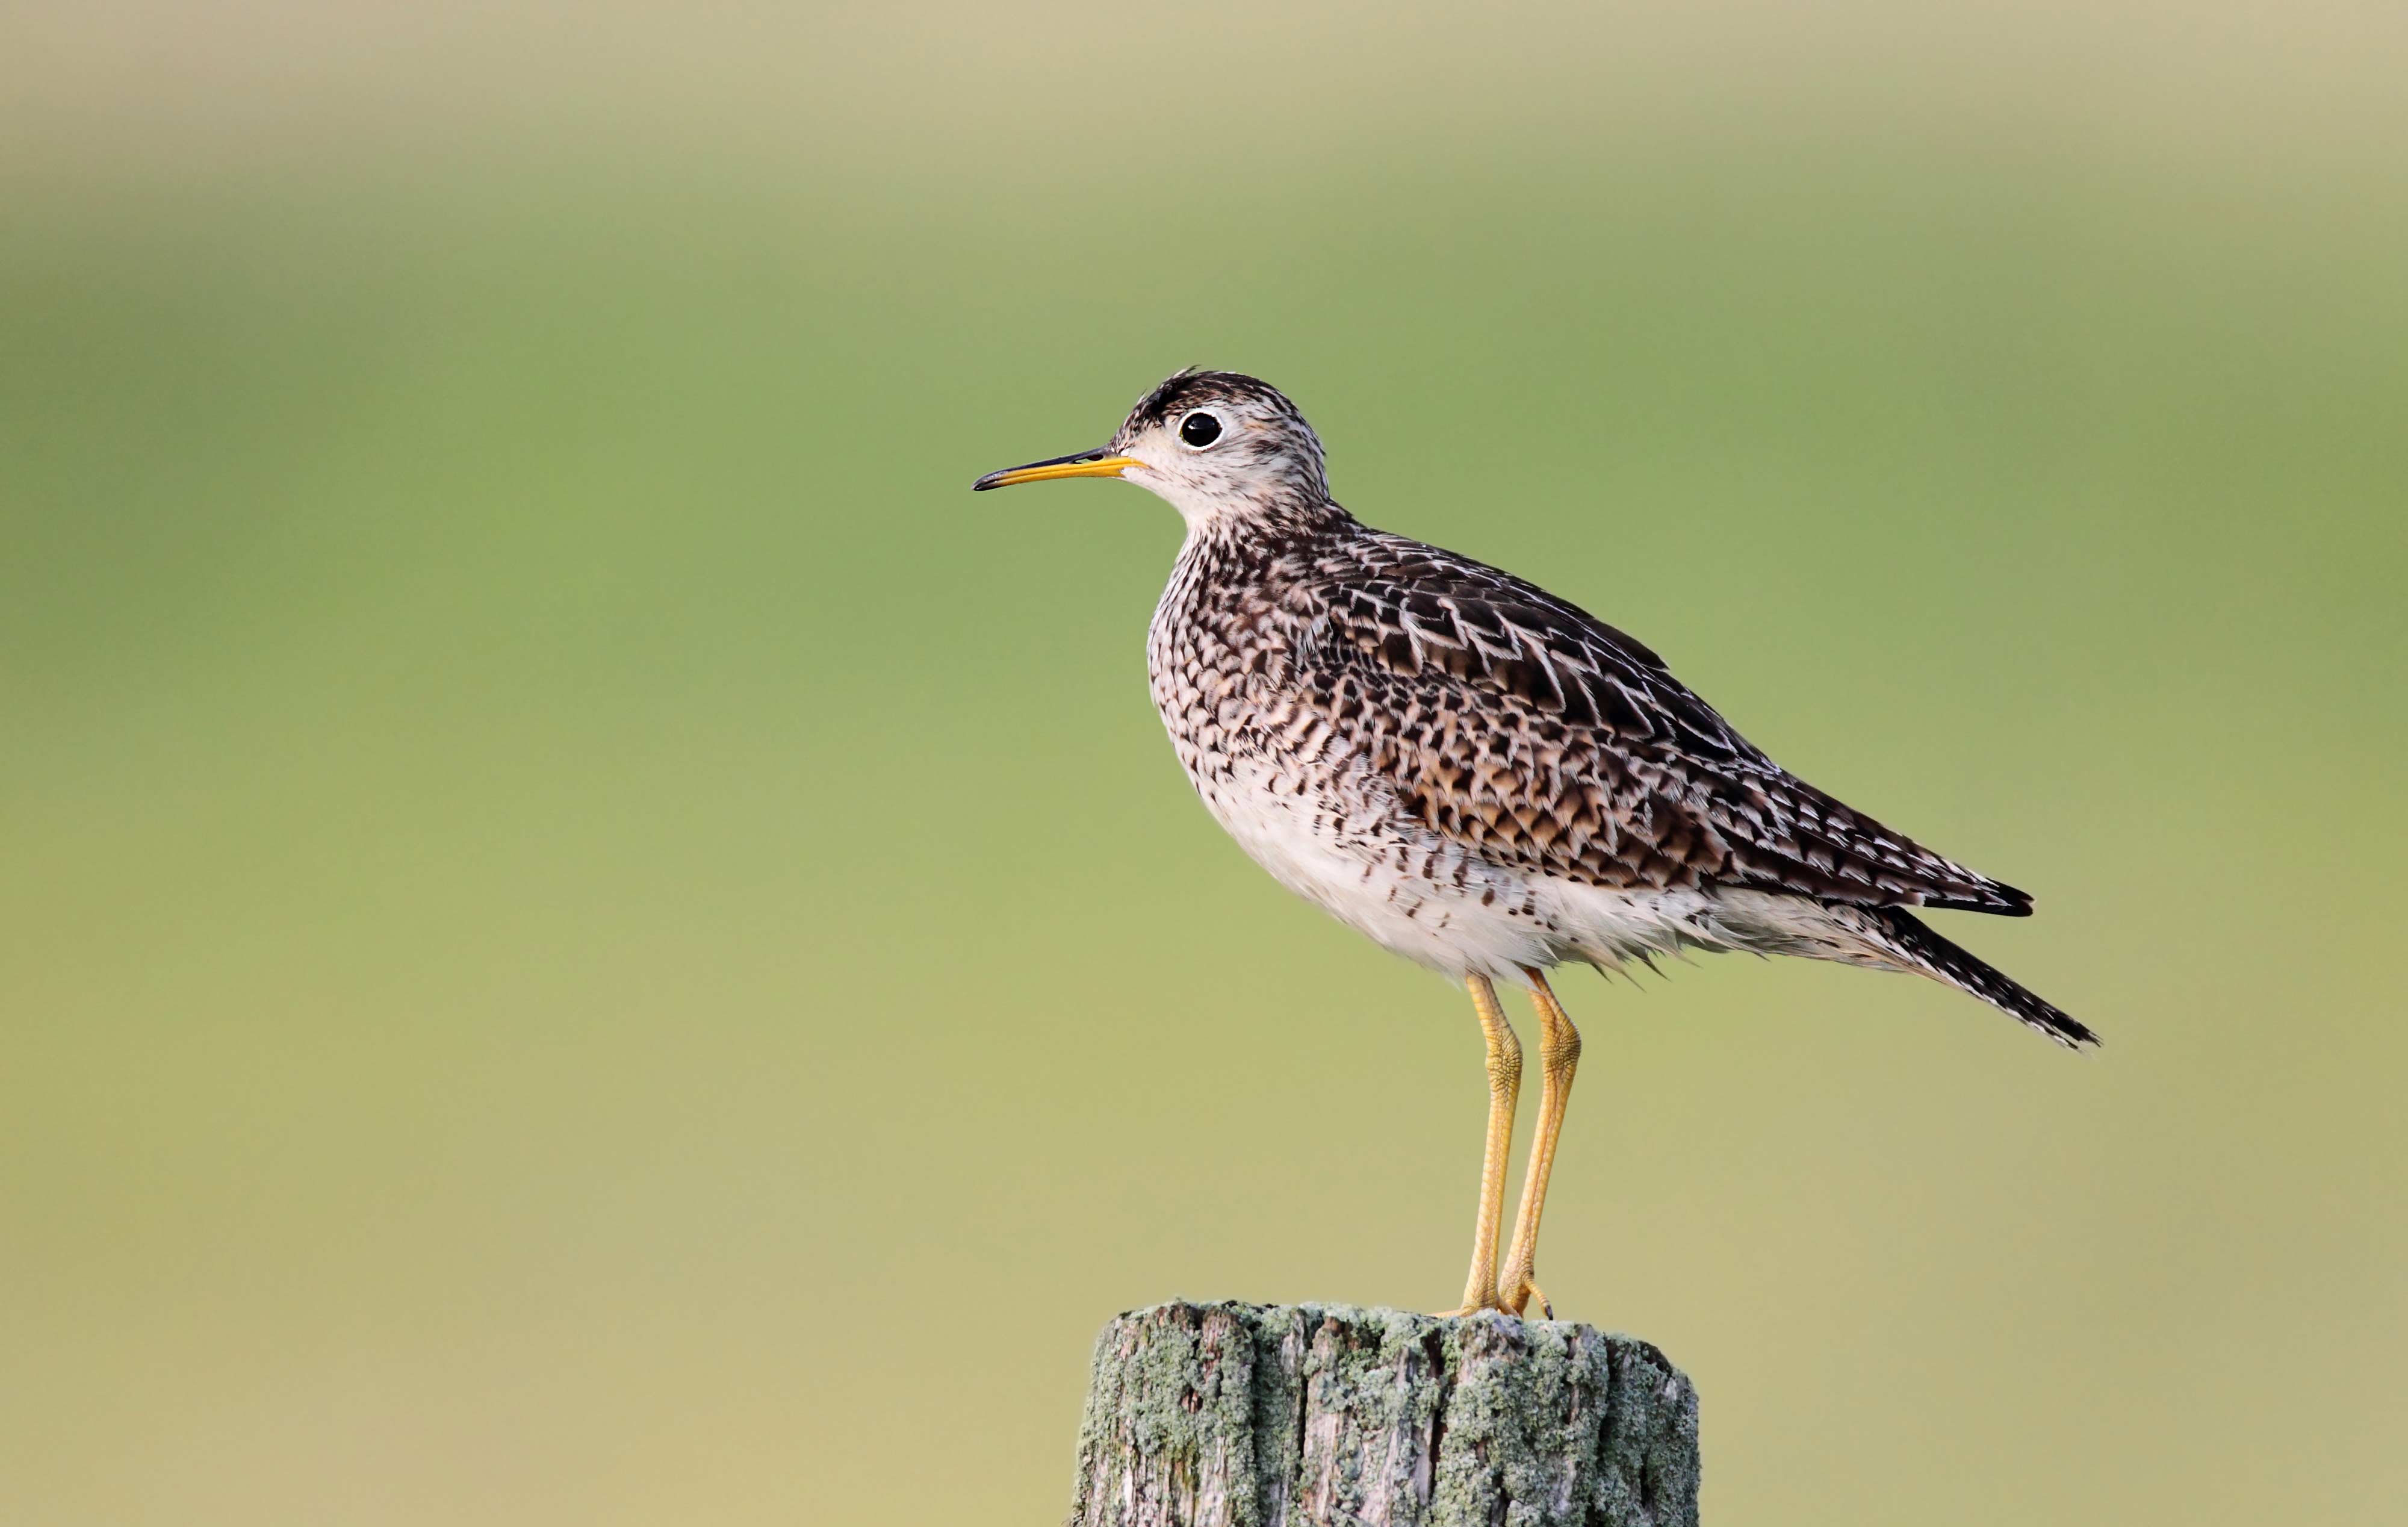 An upland sandpiper on a wooden post.